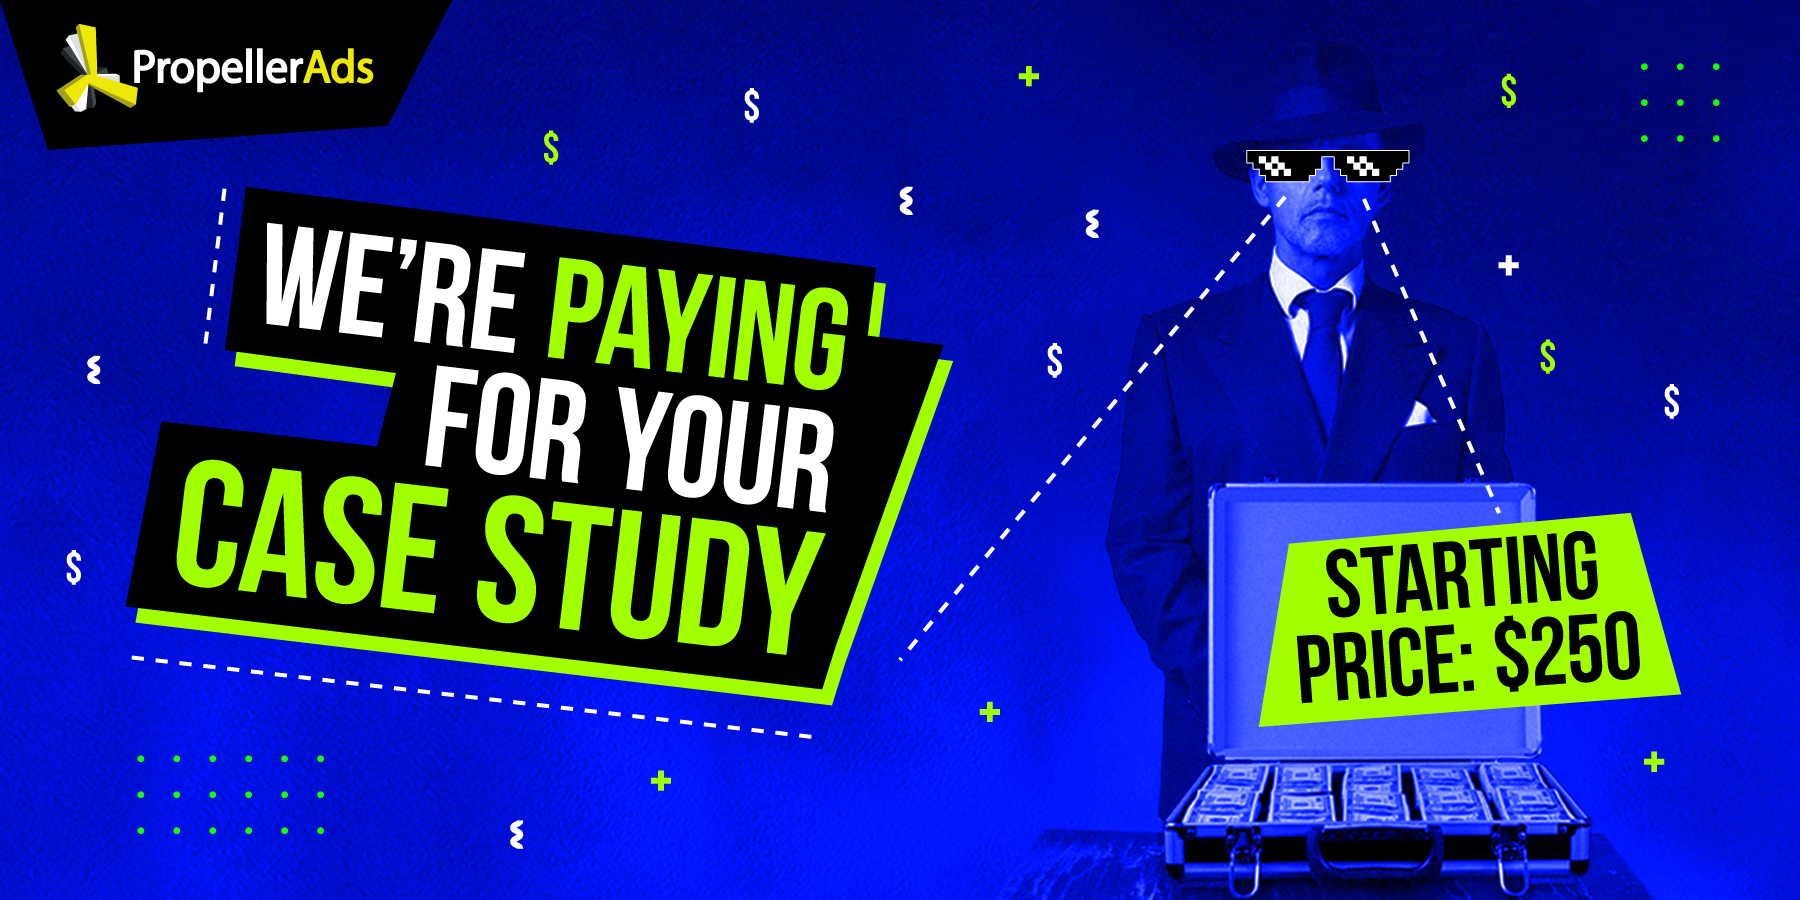 It&#39;s Time for Your Case Studies: Get Paid! - PropellerAds Blog